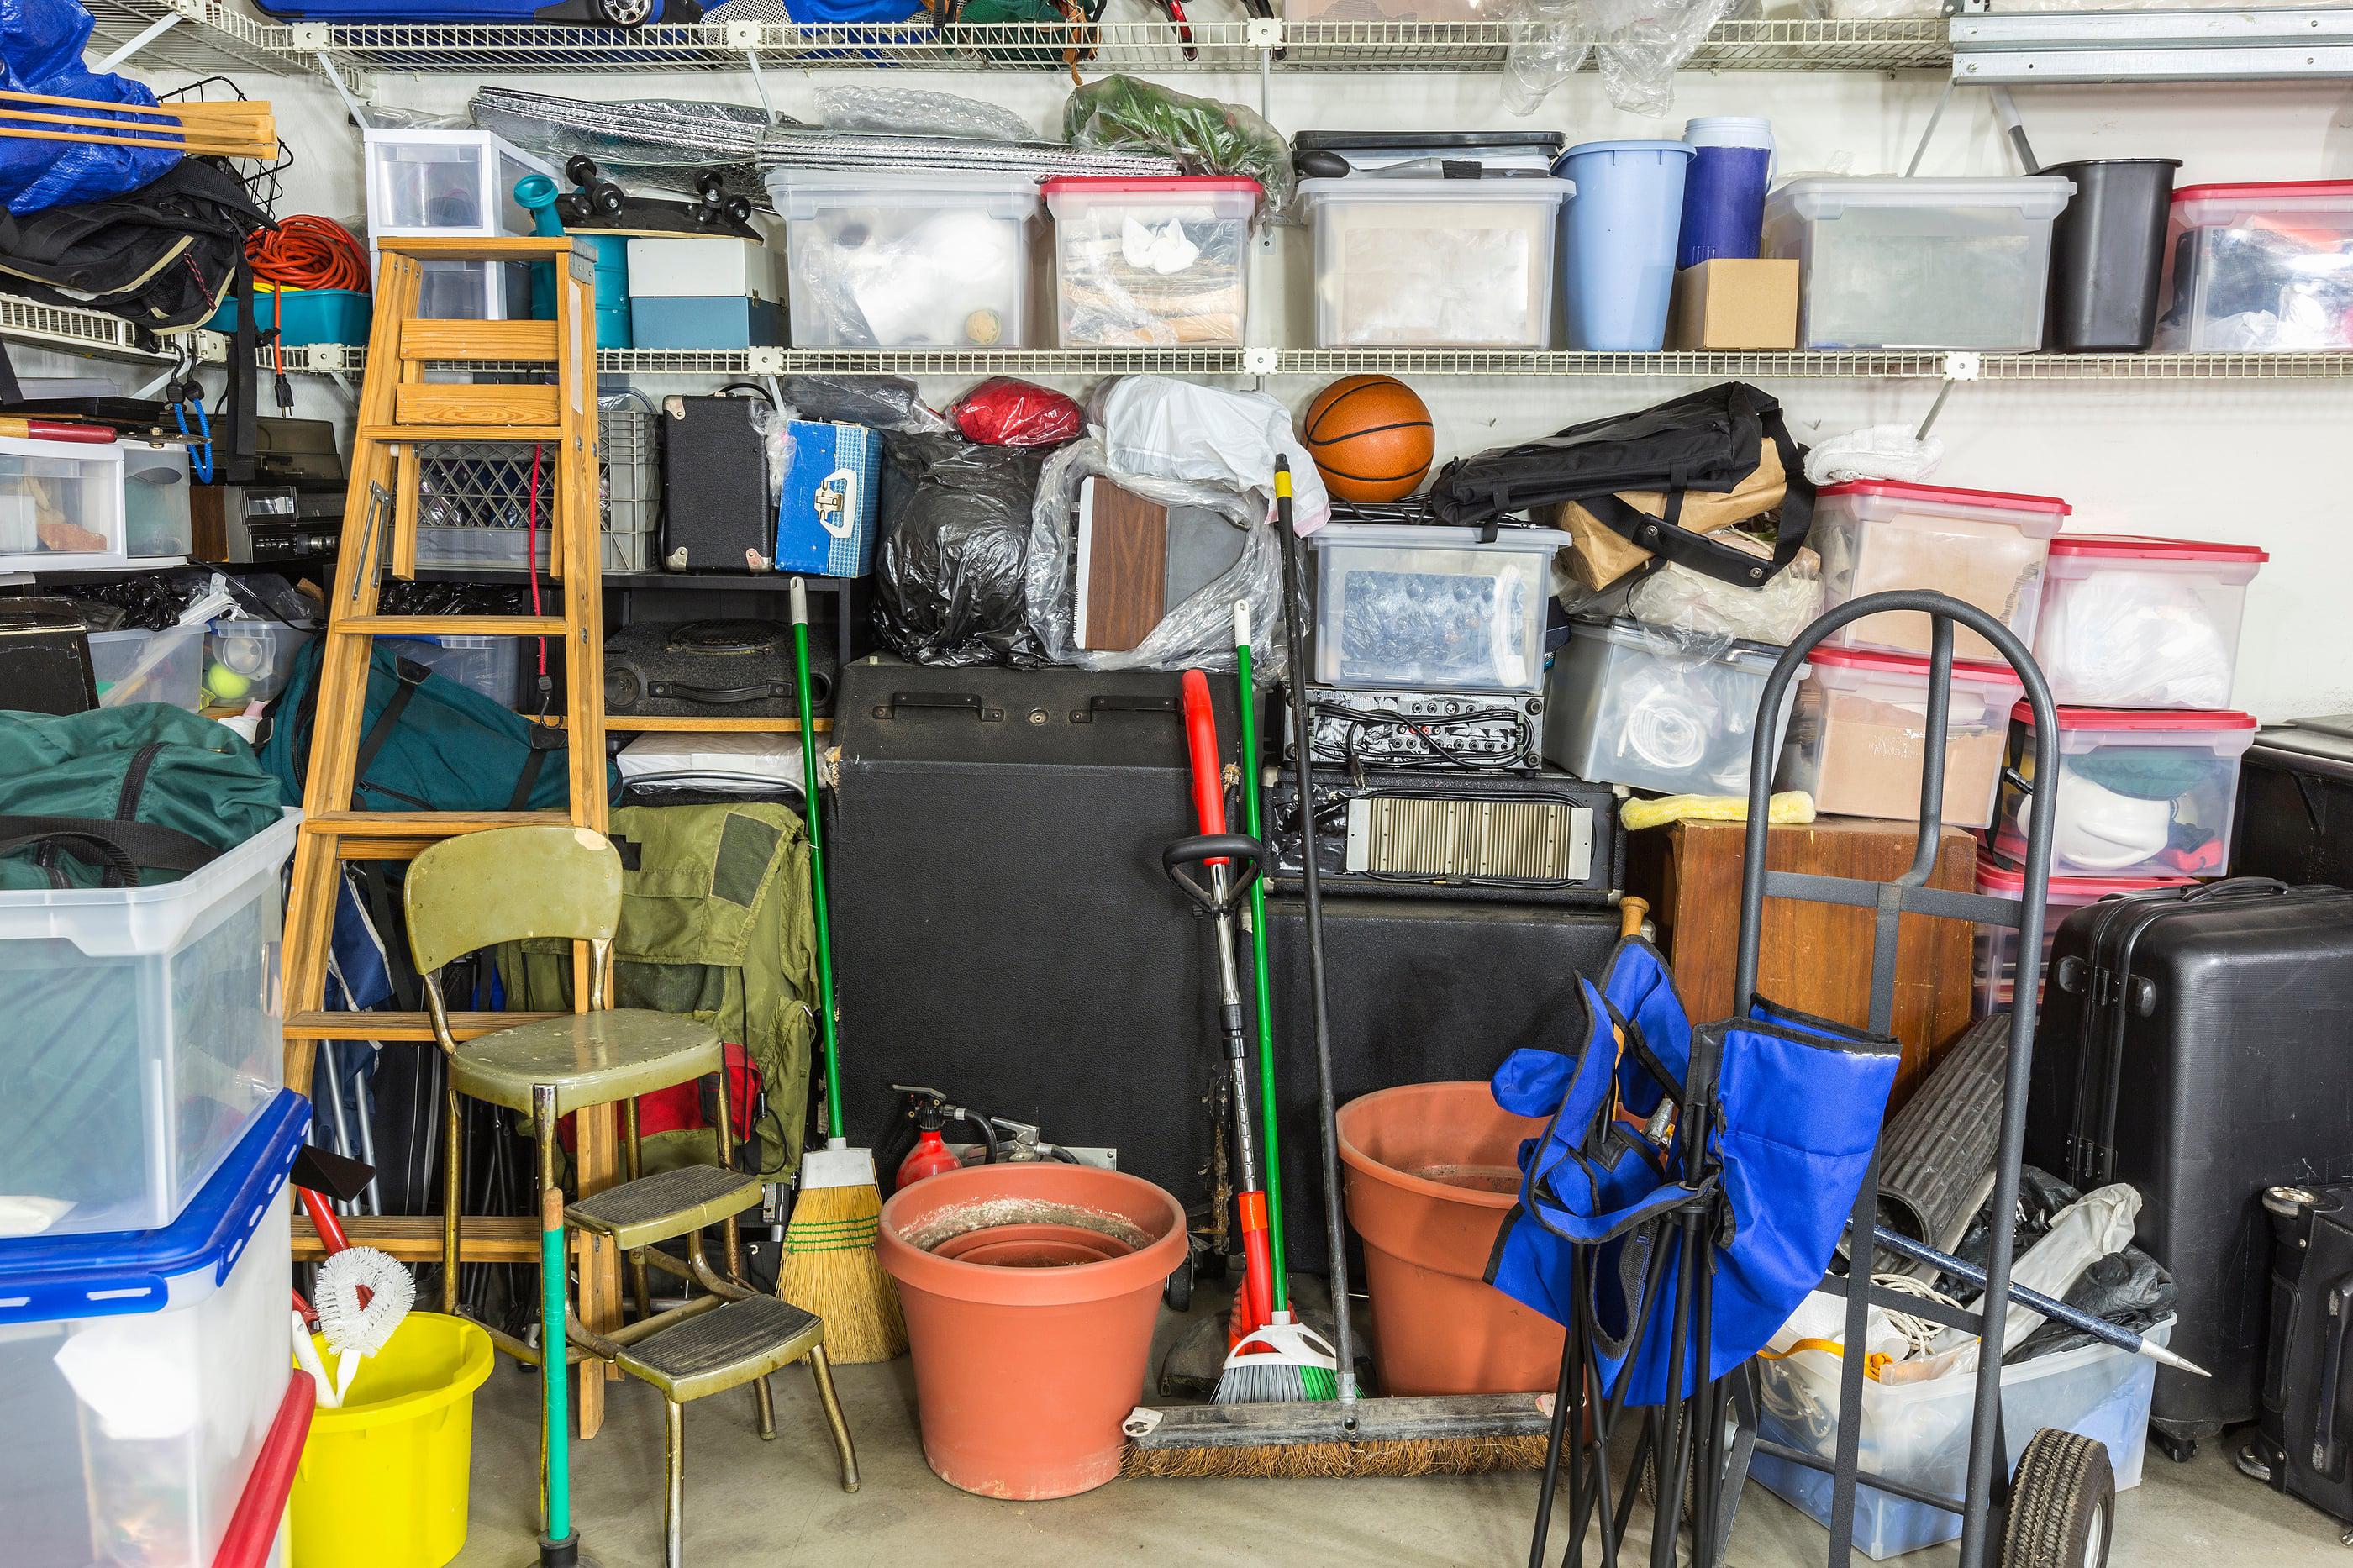 Discount dumpster can help you get rid of. Clutter and other water removal in Chicago il